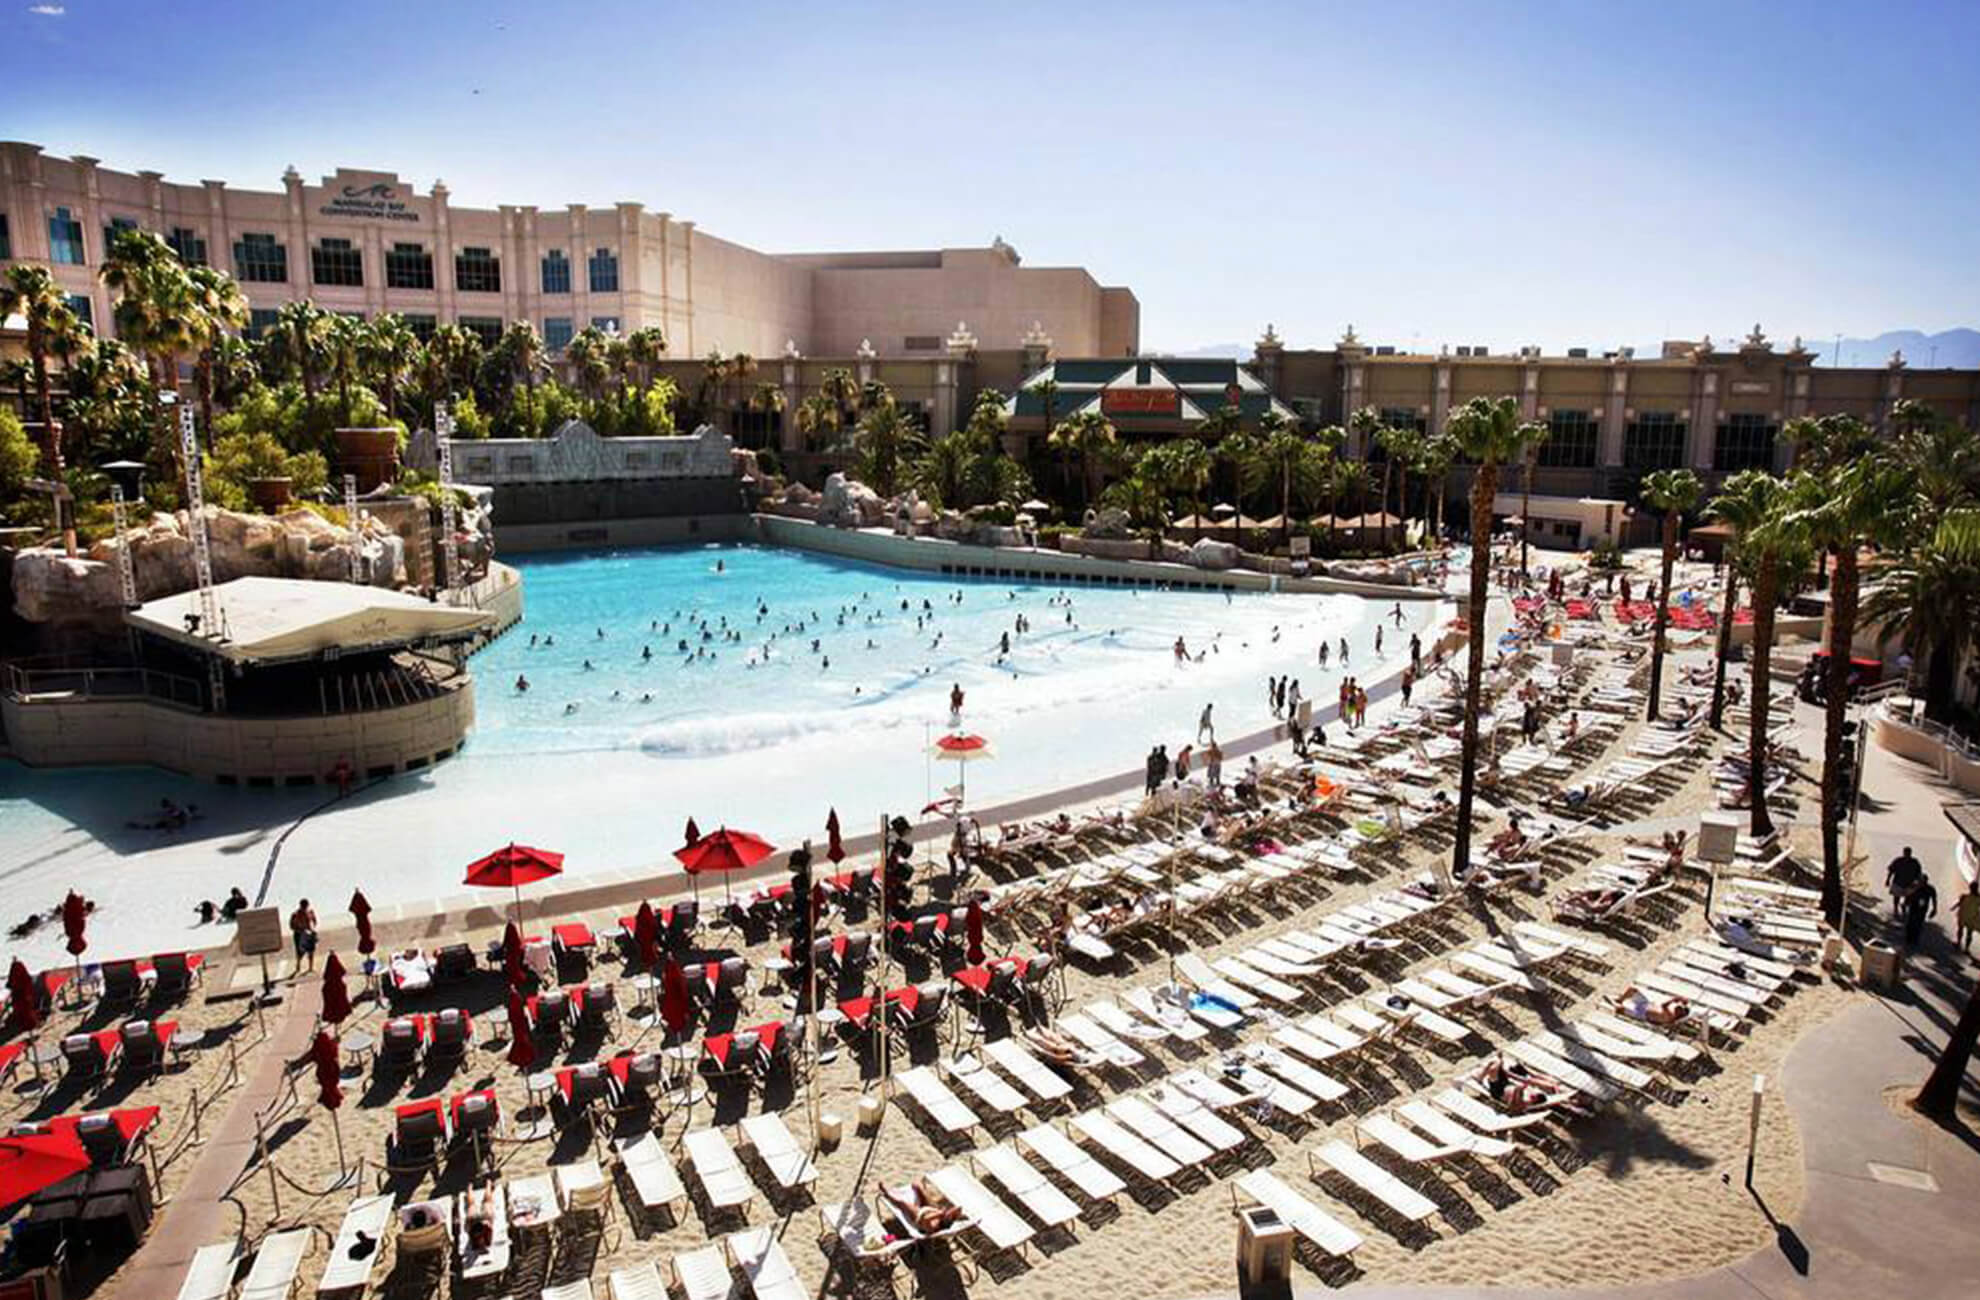 Mandalay Bay Hotel, Pools, lazy river, wave pool, relaxation and